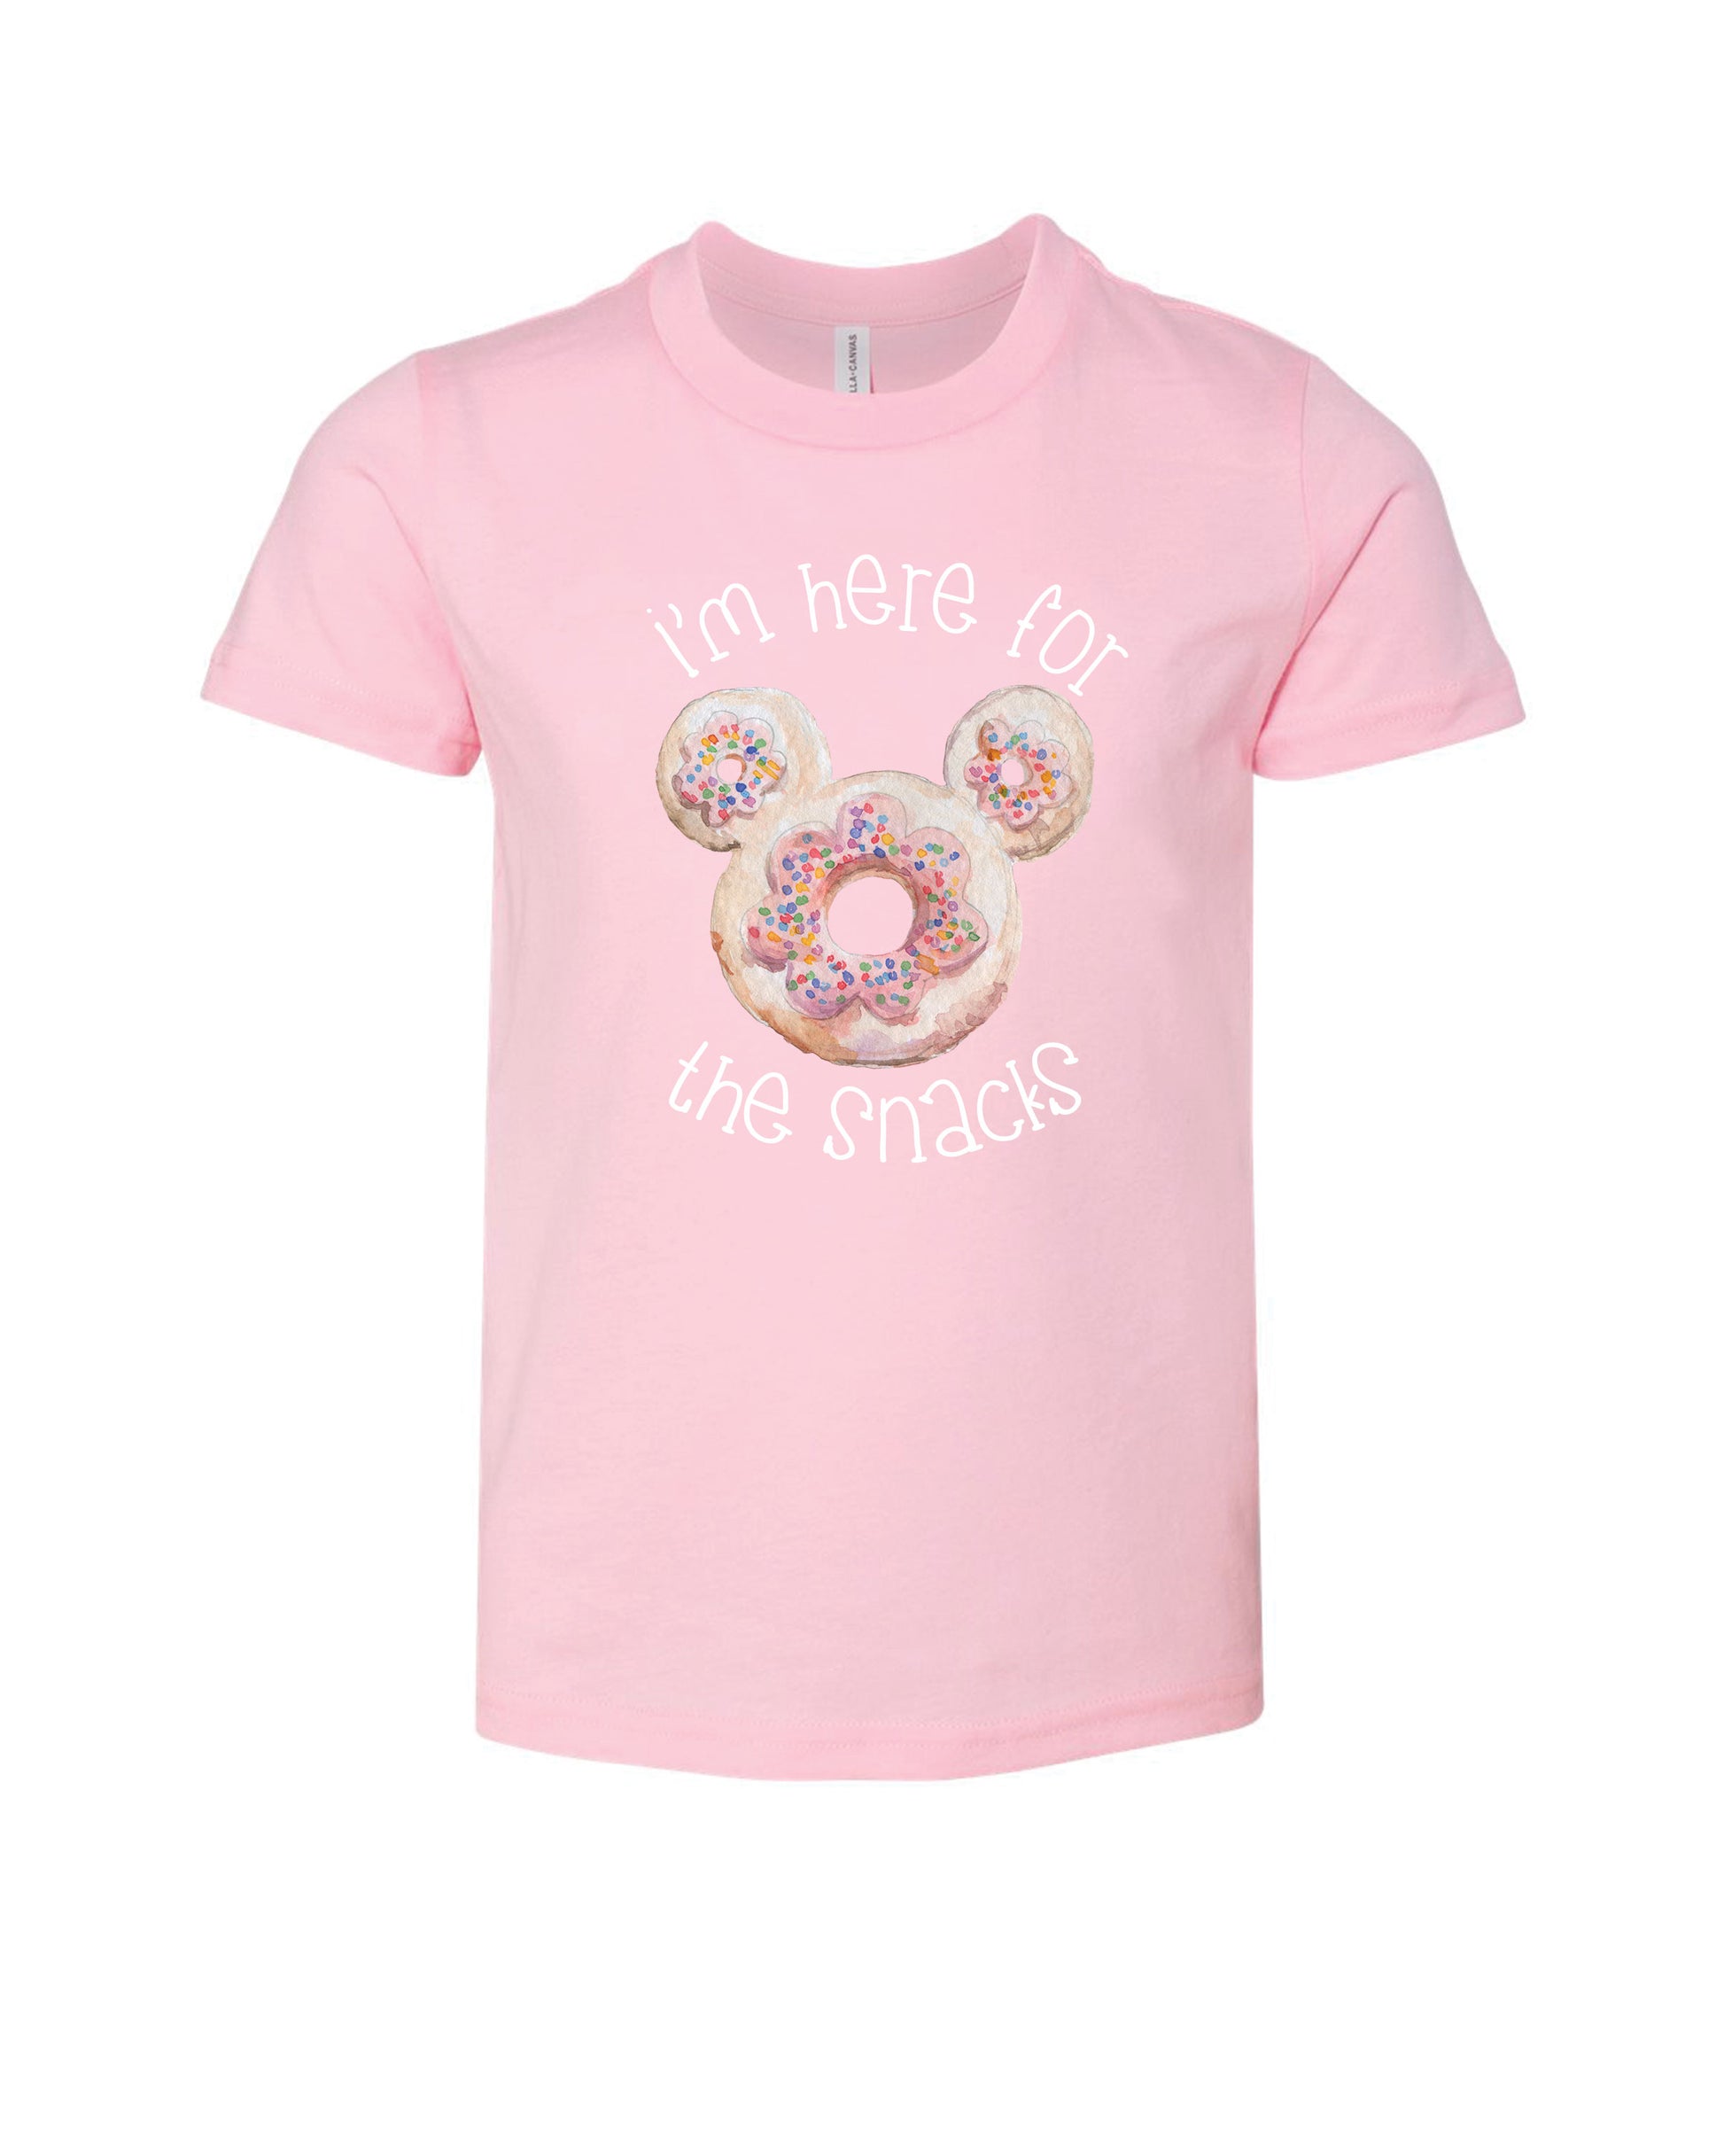 Here For The Snacks | Tee | Kids-Sister Shirts-Sister Shirts, Cute & Custom Tees for Mama & Littles in Trussville, Alabama.